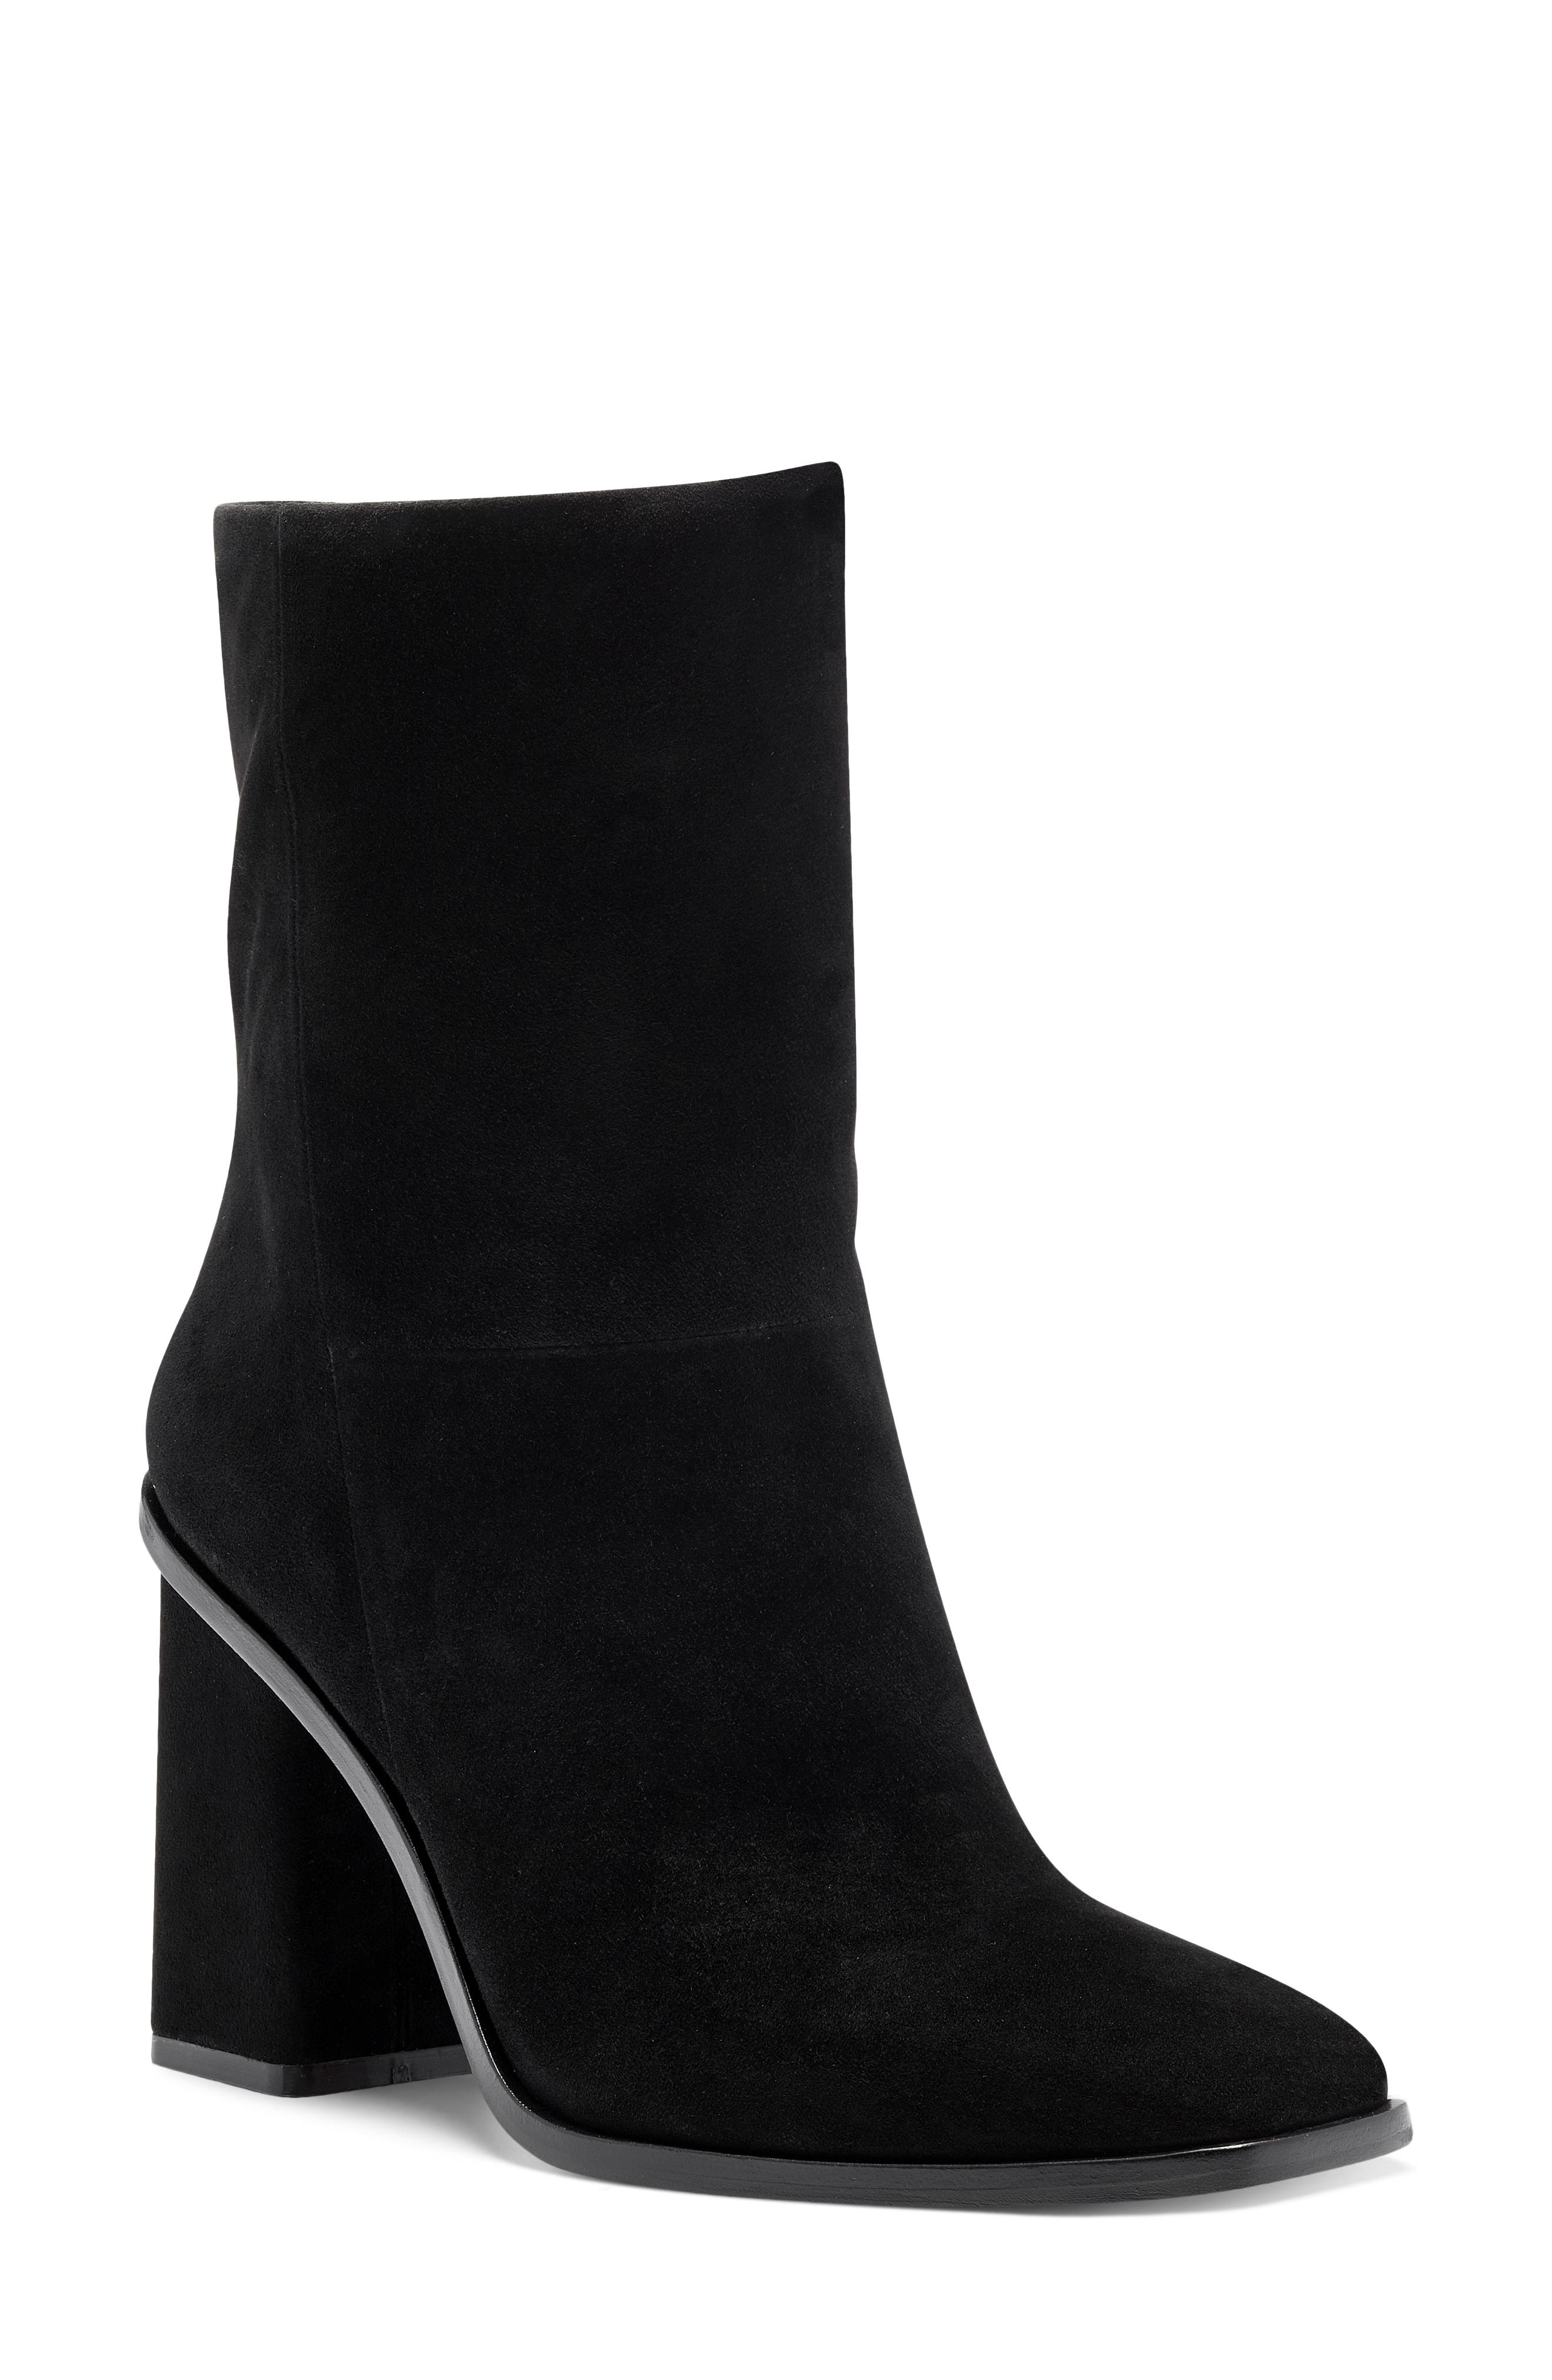 vince camuto women's walden round toe leather booties